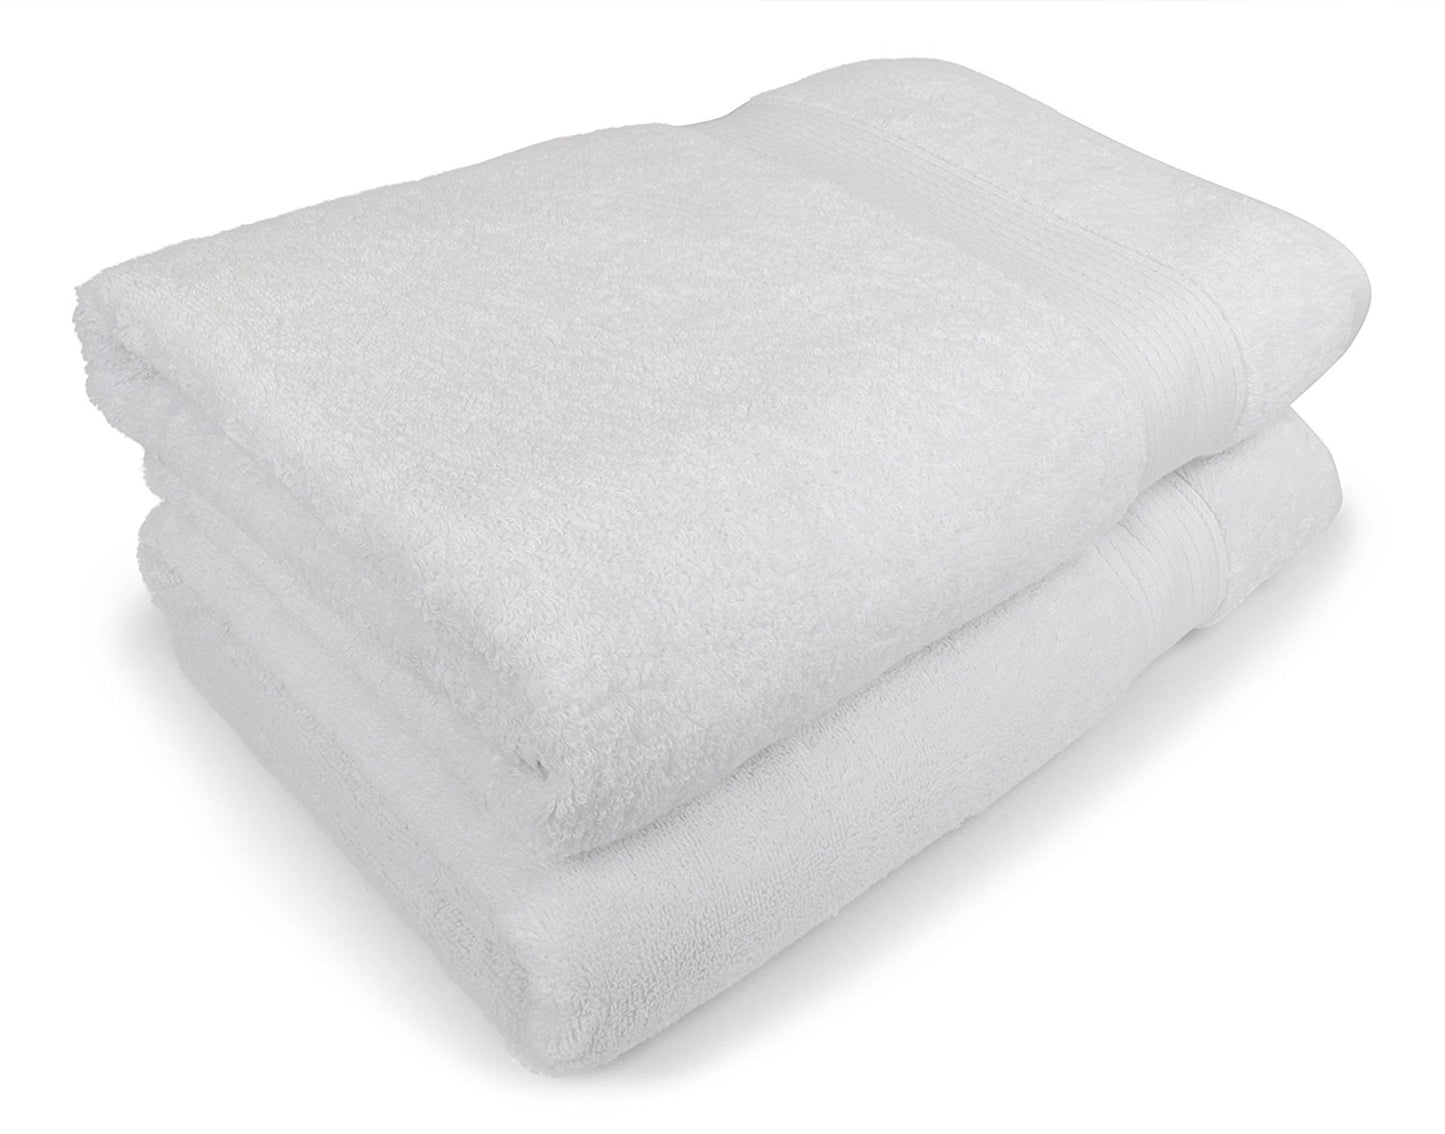 Silk and Turkish Cotton Blended Bath Sheet Towels - 2 Pieces